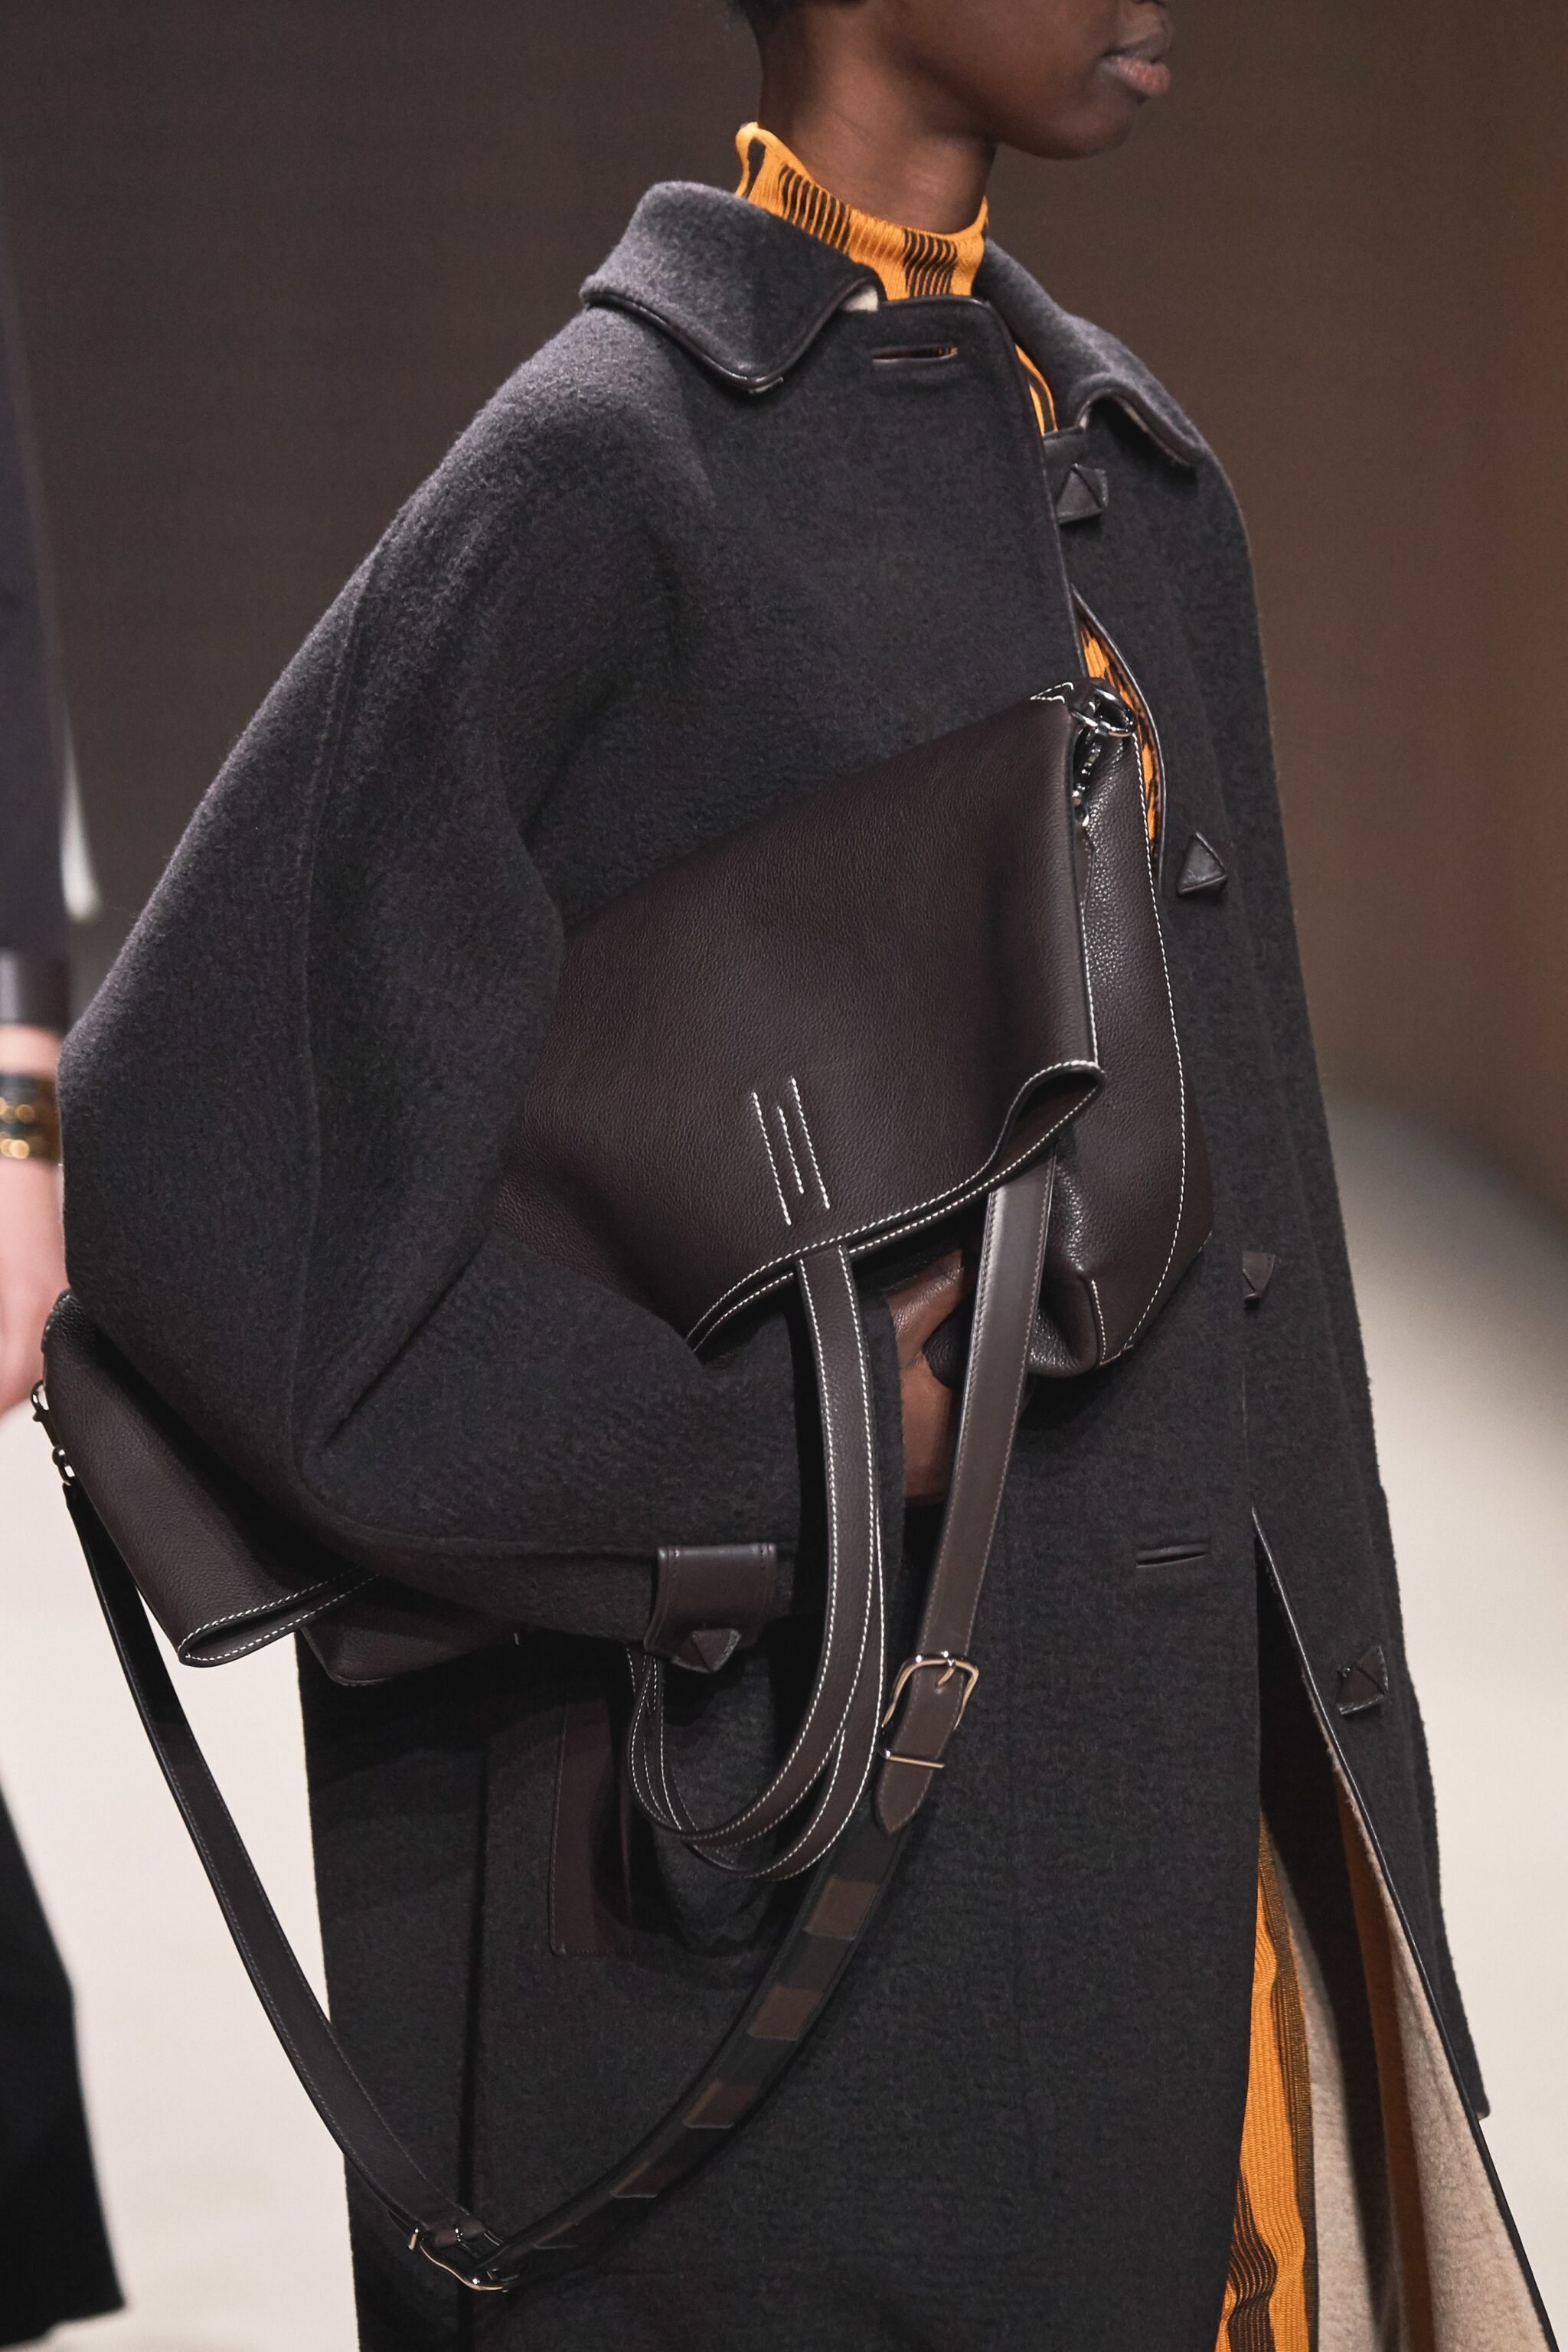 Hermes Fall/Winter 2019 Runway featuring Mini Constance Bag | Spotted Fashion